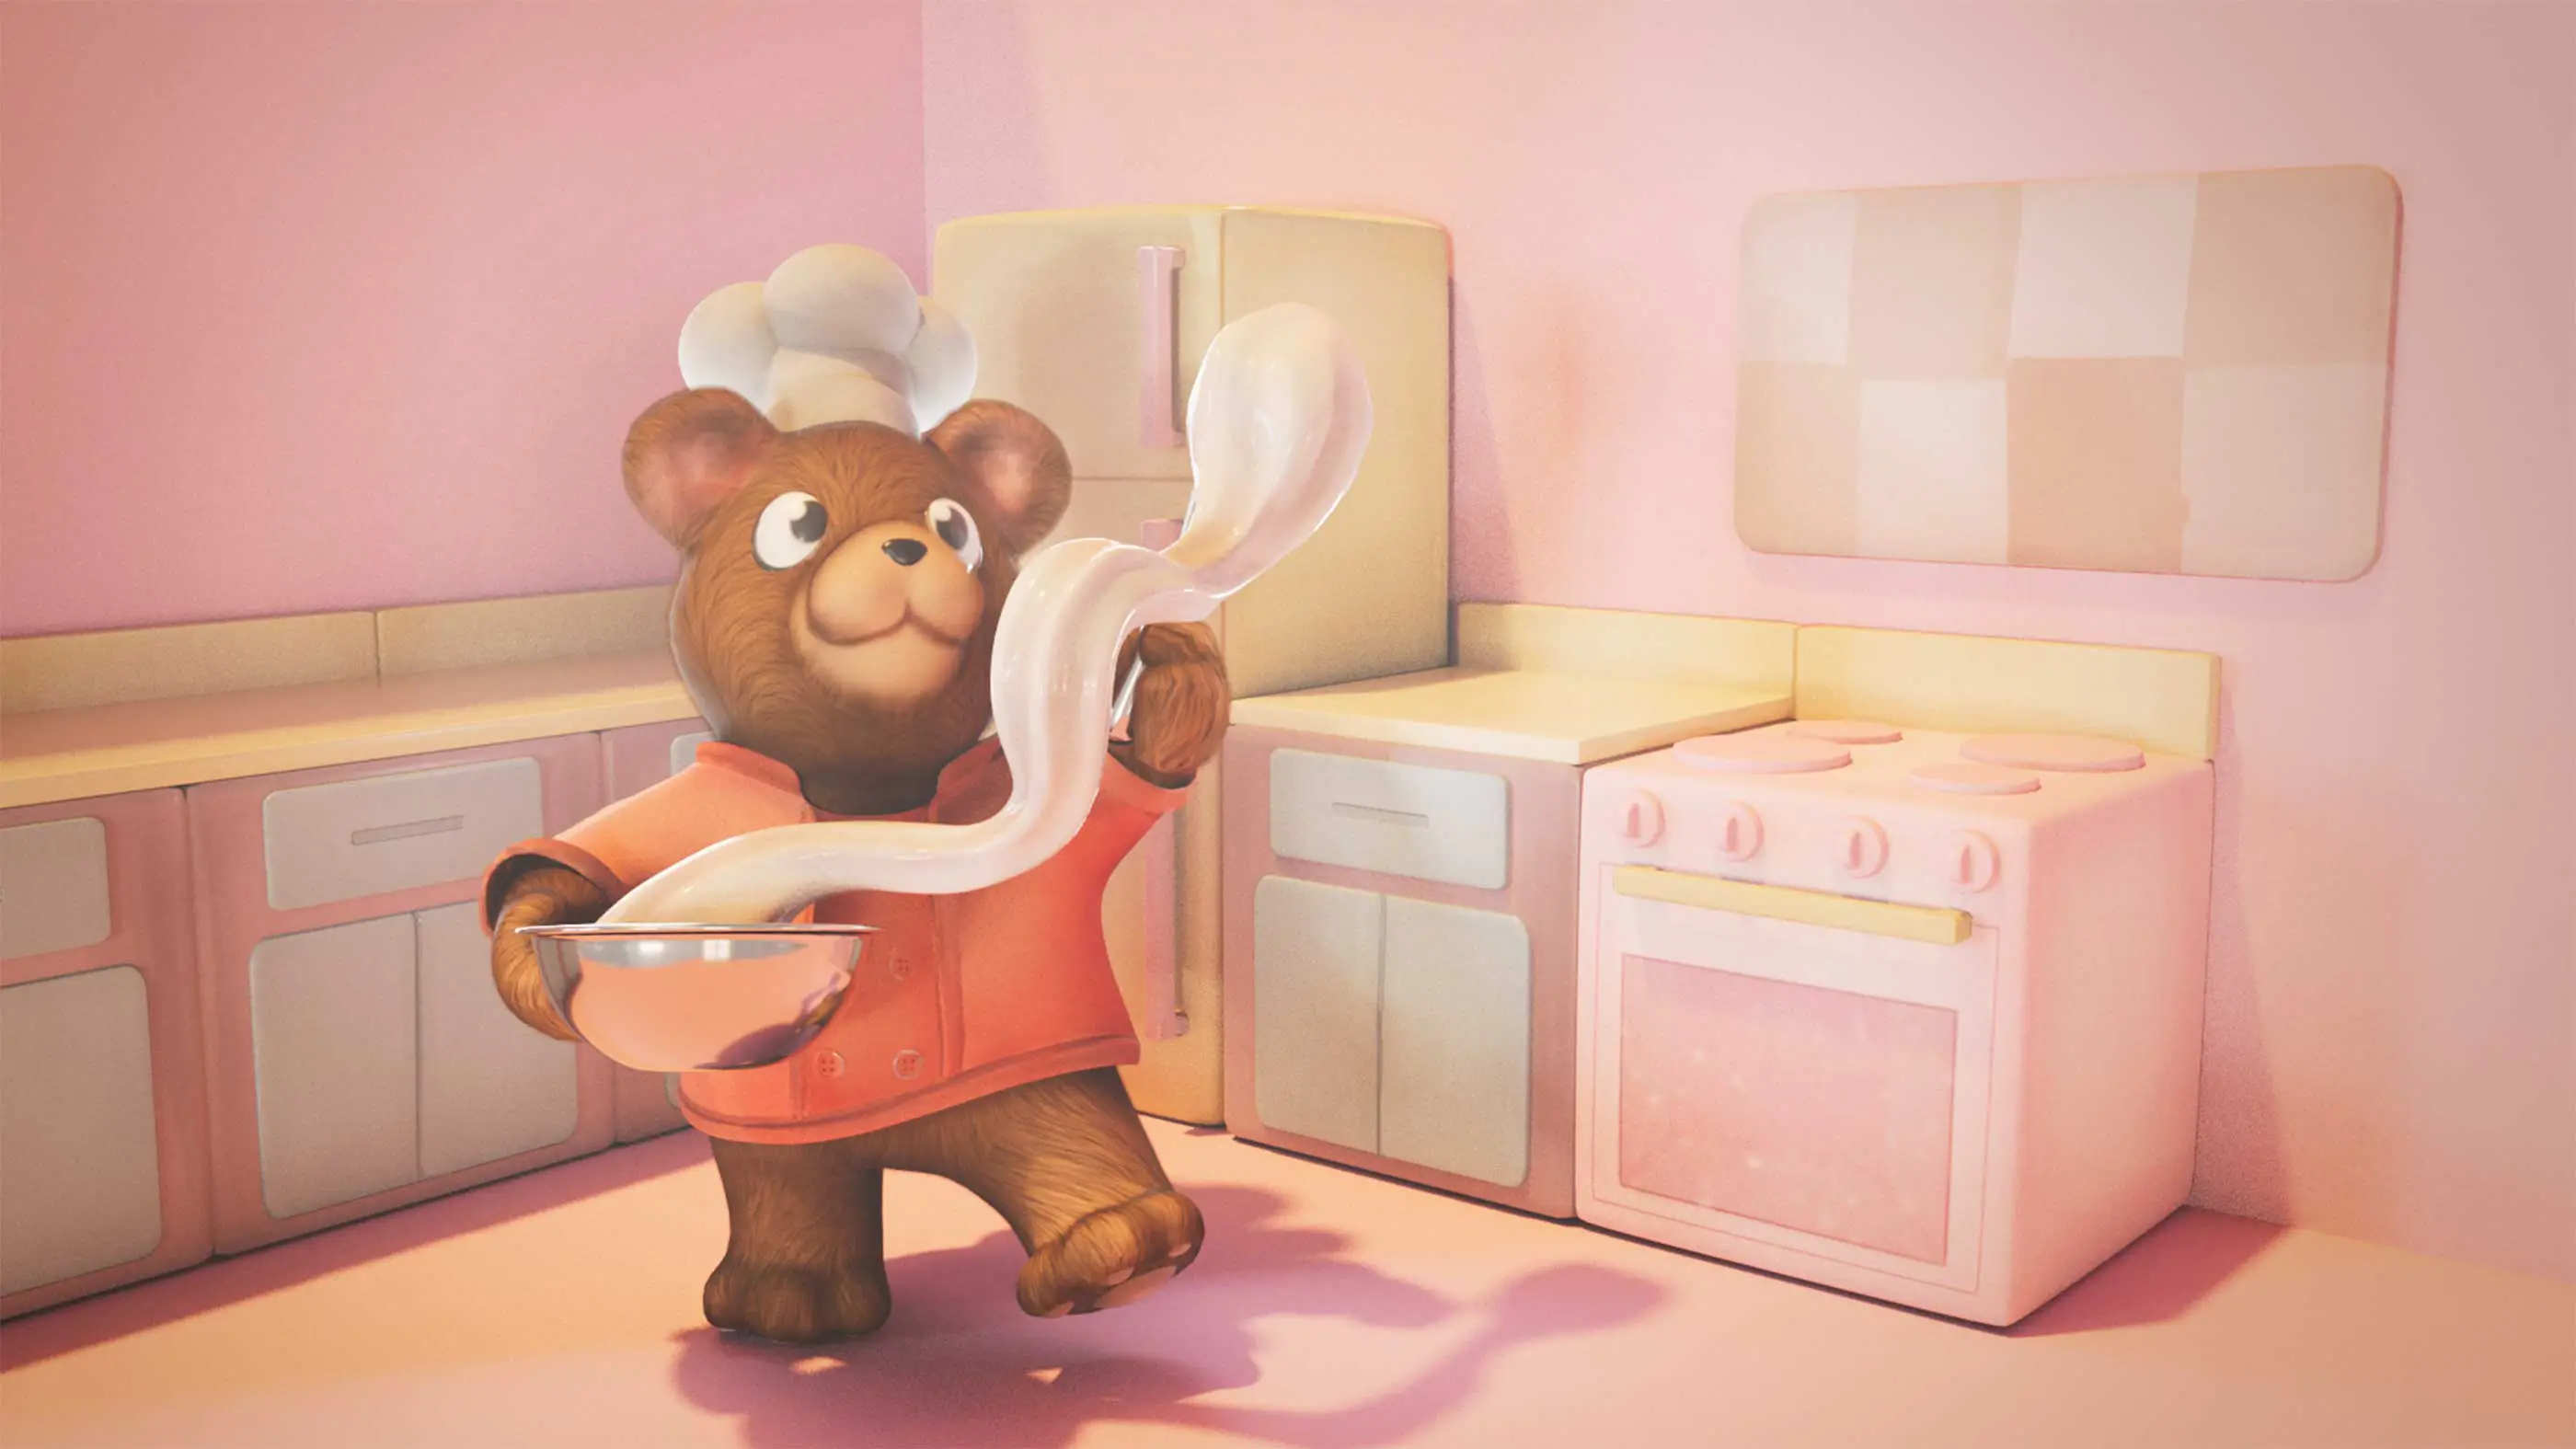 A 3D model of a bear in a kitchen with a chef hat.